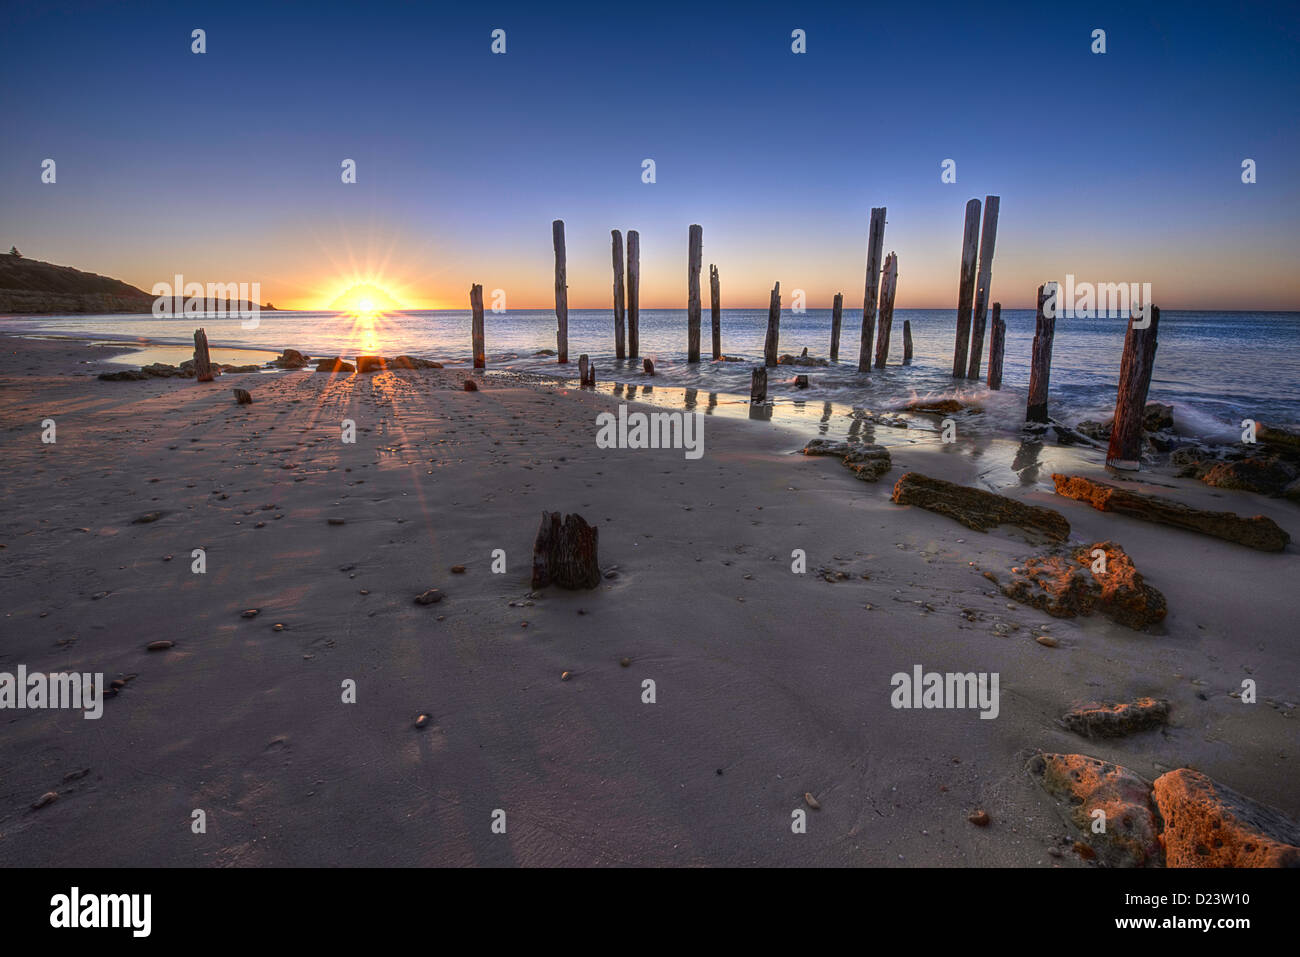 A spectacular sunset over the sea behind the remains of an old settlers' pier on Port Willunga beach. Stock Photo